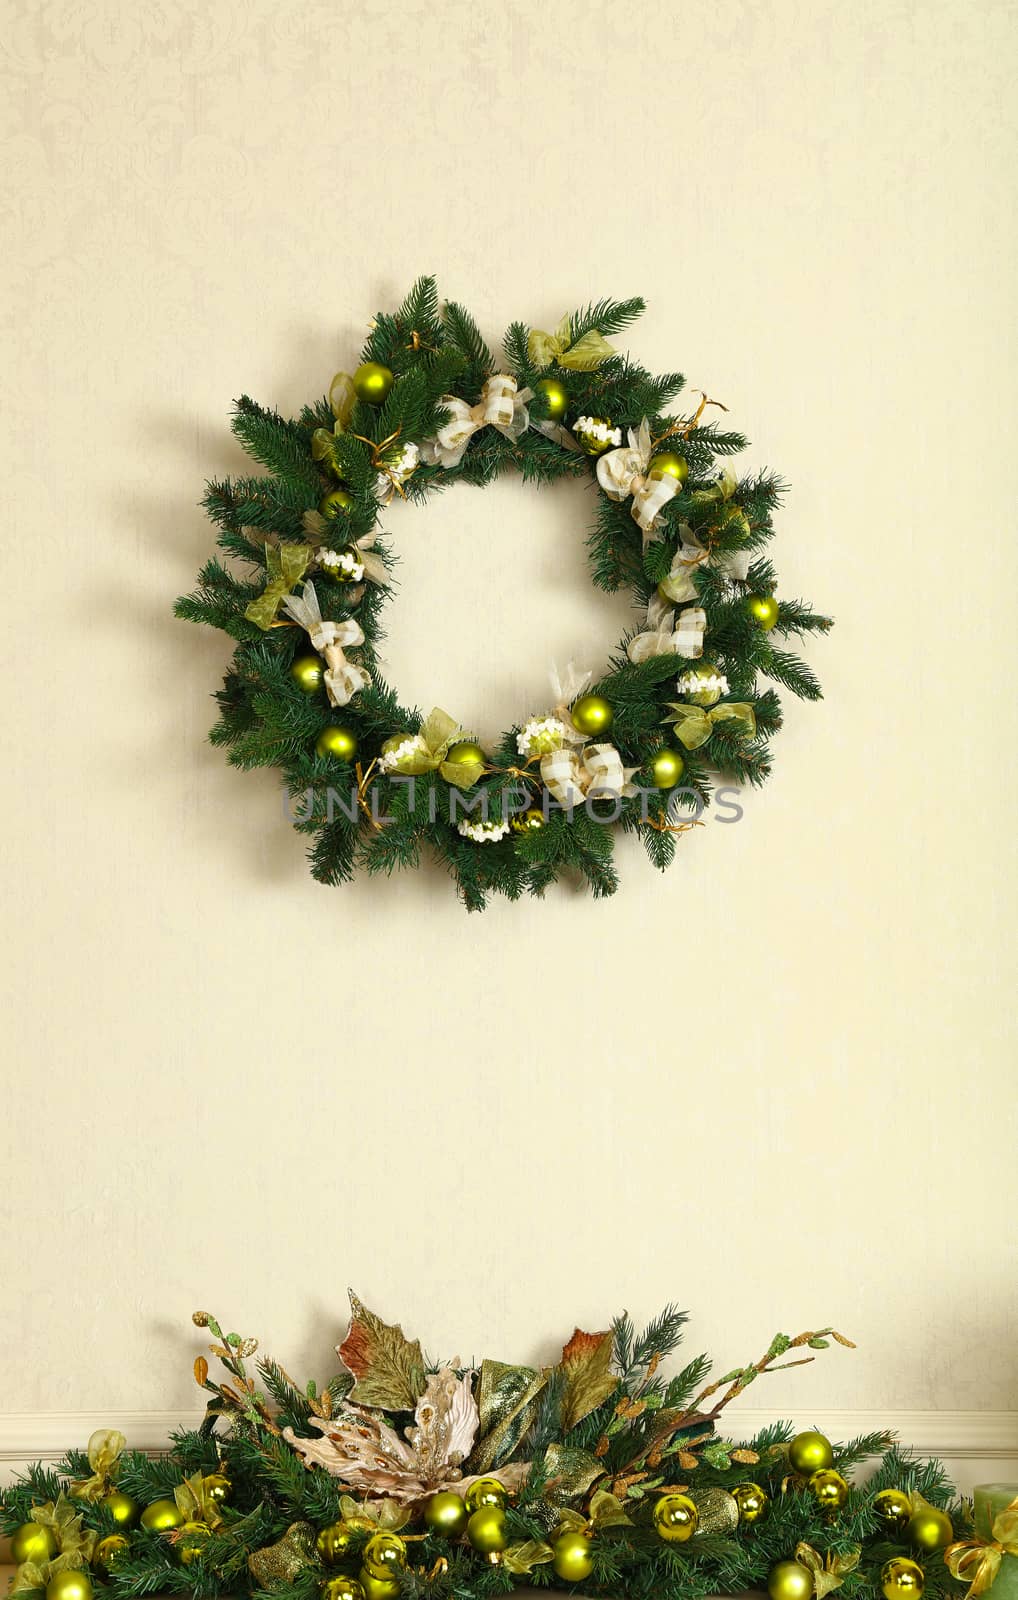 Close up green Christmas wreath decoration on beige wall, front view